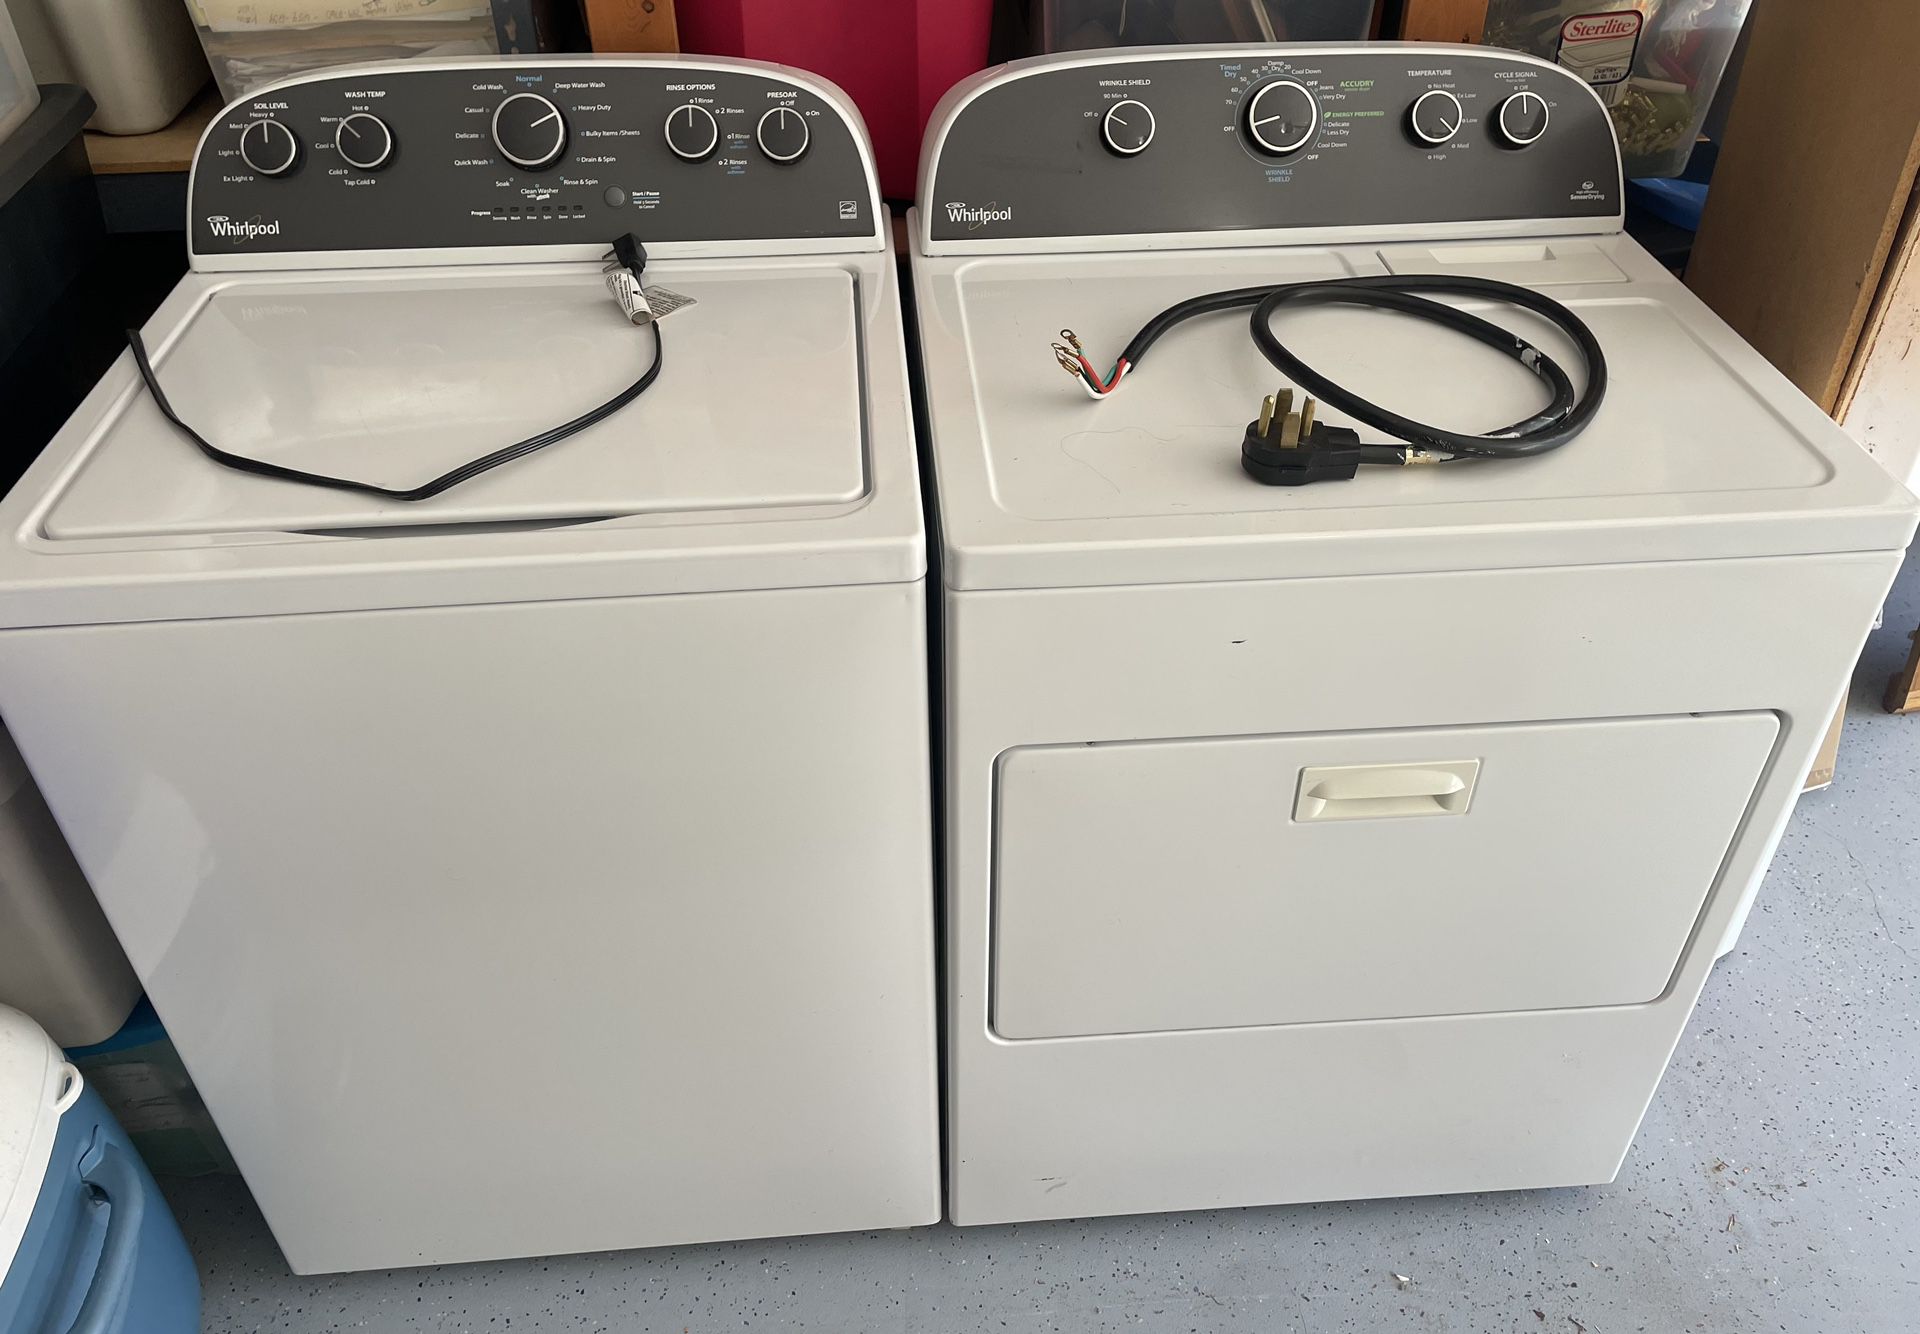 Whirlpool - washer and dryer